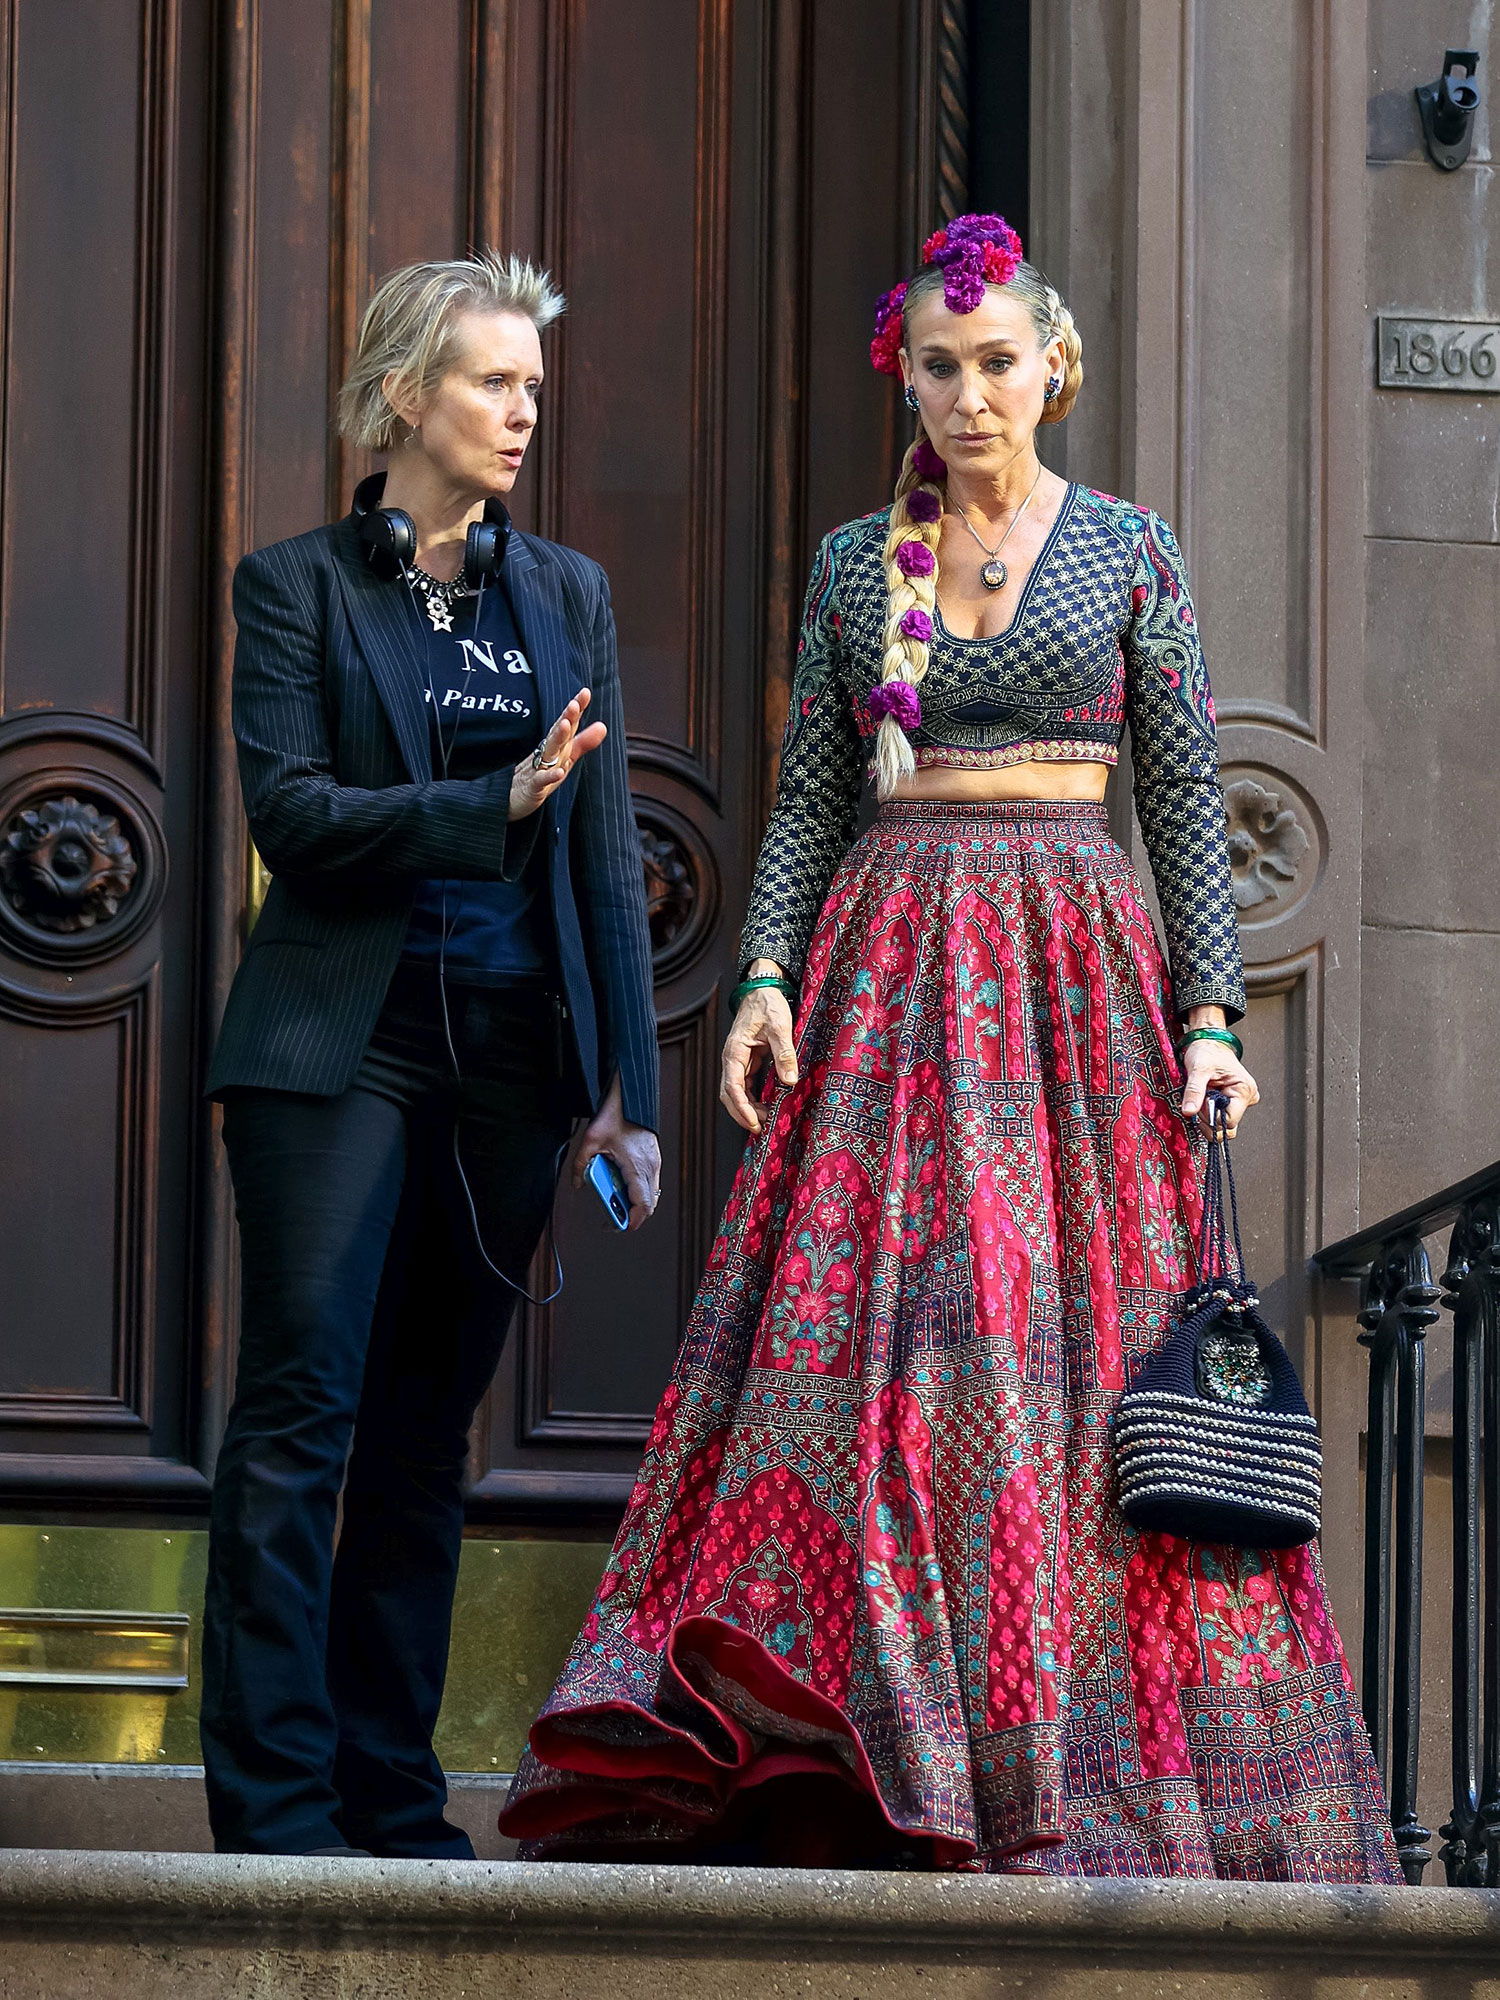 Sex And The City' Returns: Can The Show Known For Fashion Help